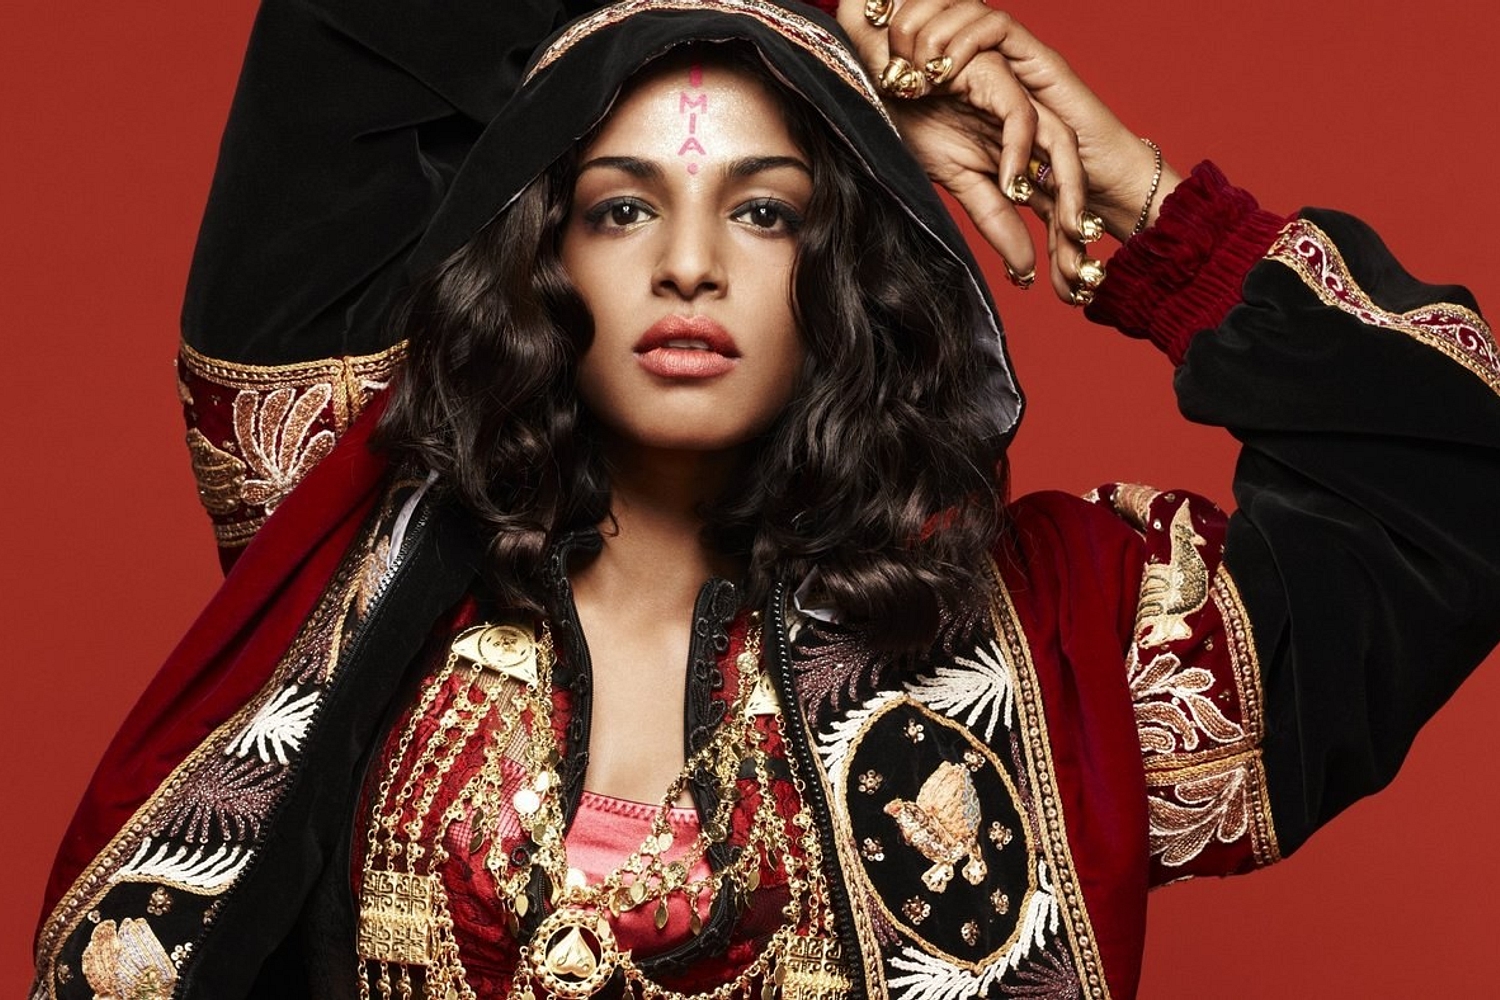 M.I.A. is curating Meltdown 2017